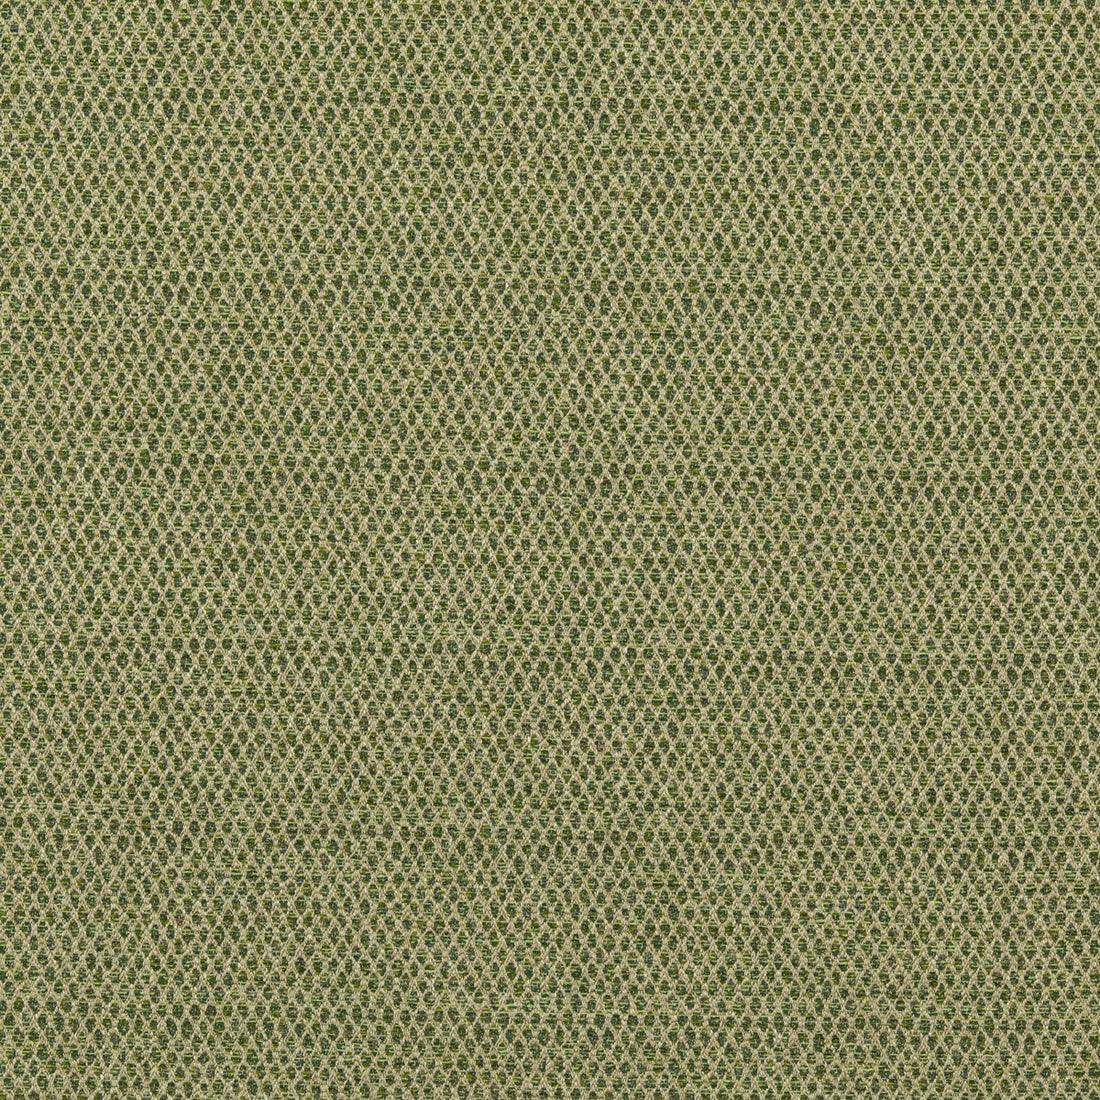 Pednor fabric in green color - pattern BF10874.735.0 - by G P &amp; J Baker in the Essential Colours II collection